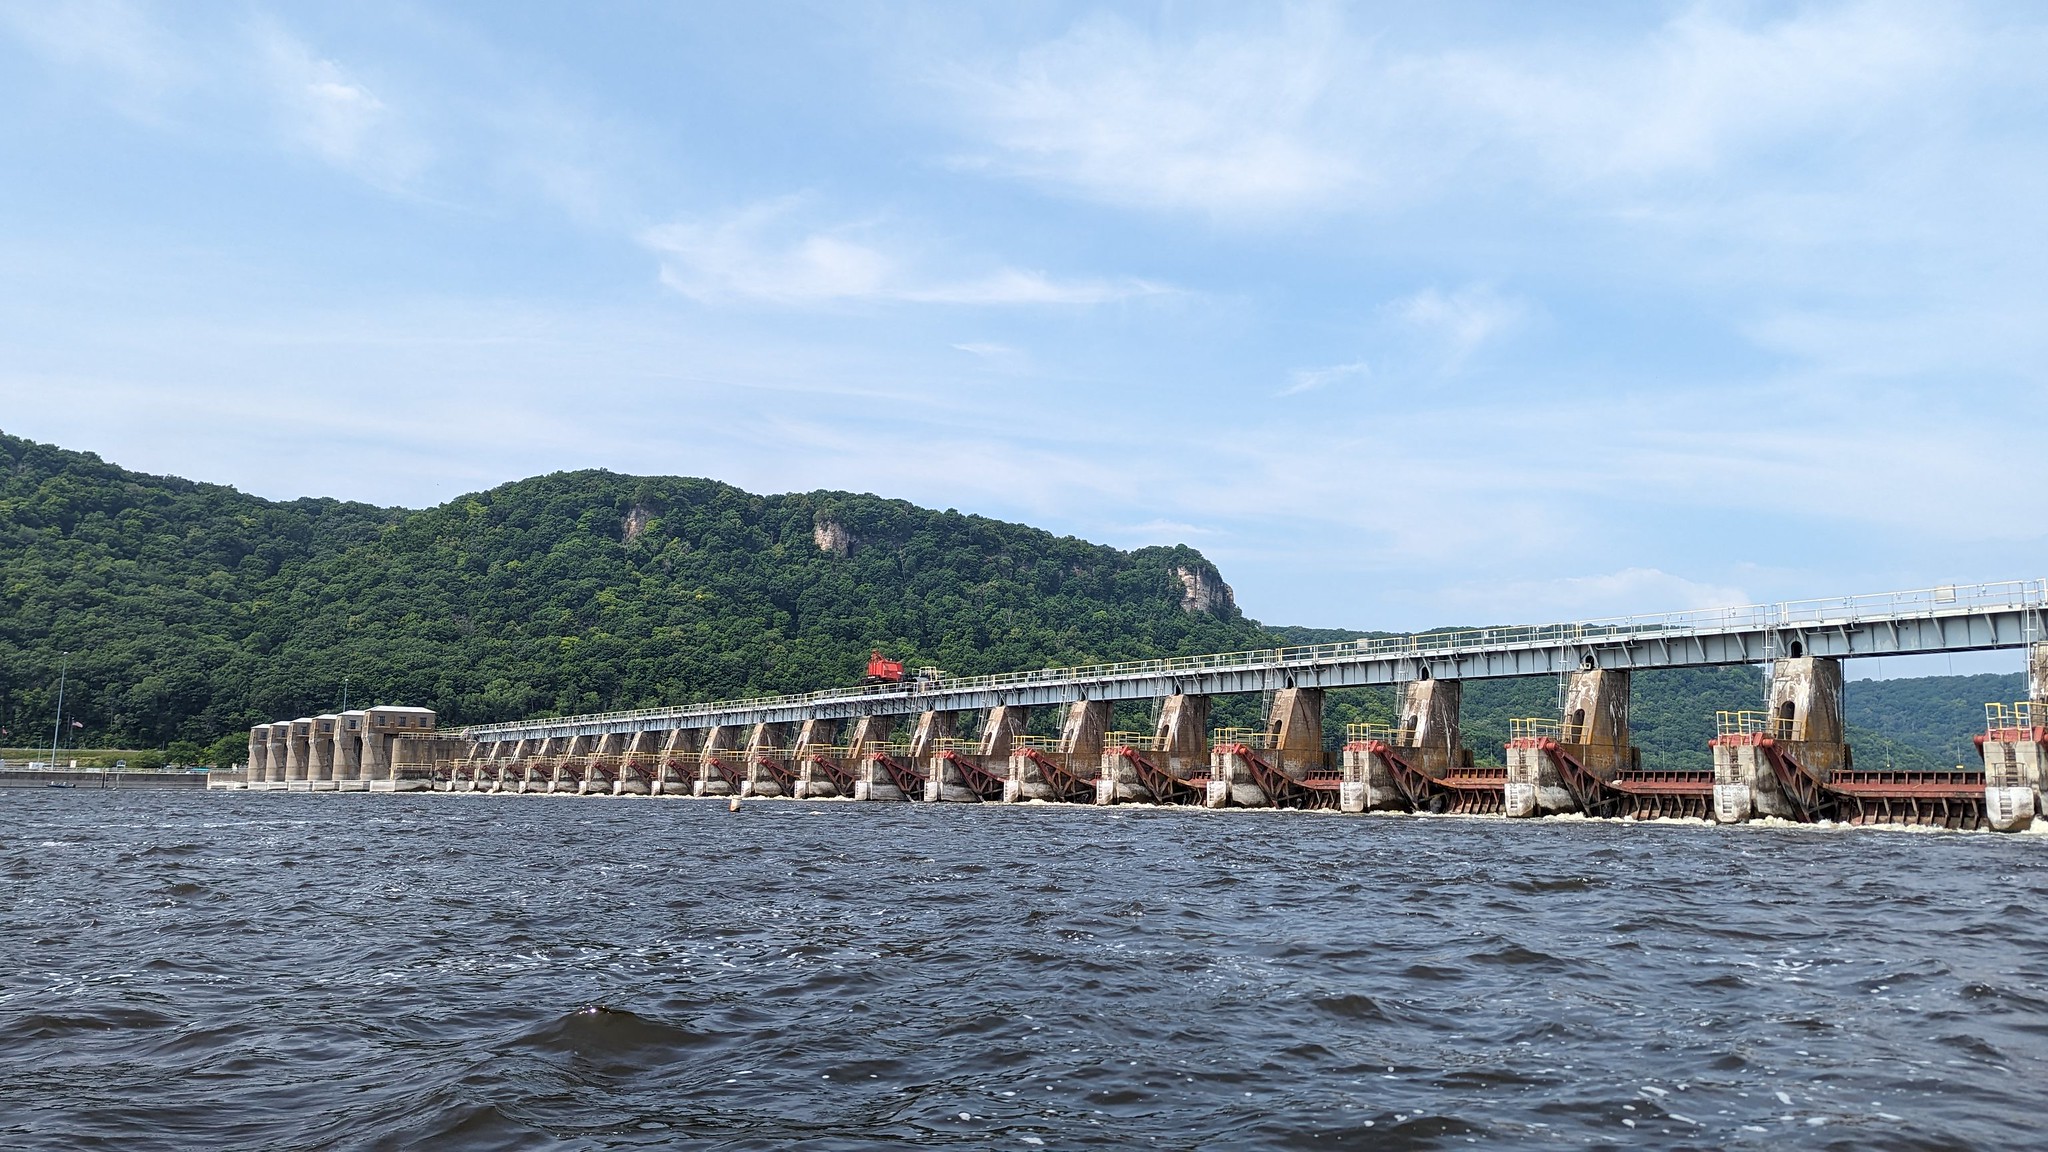 Lock and Dam 5 on the Mississippi River